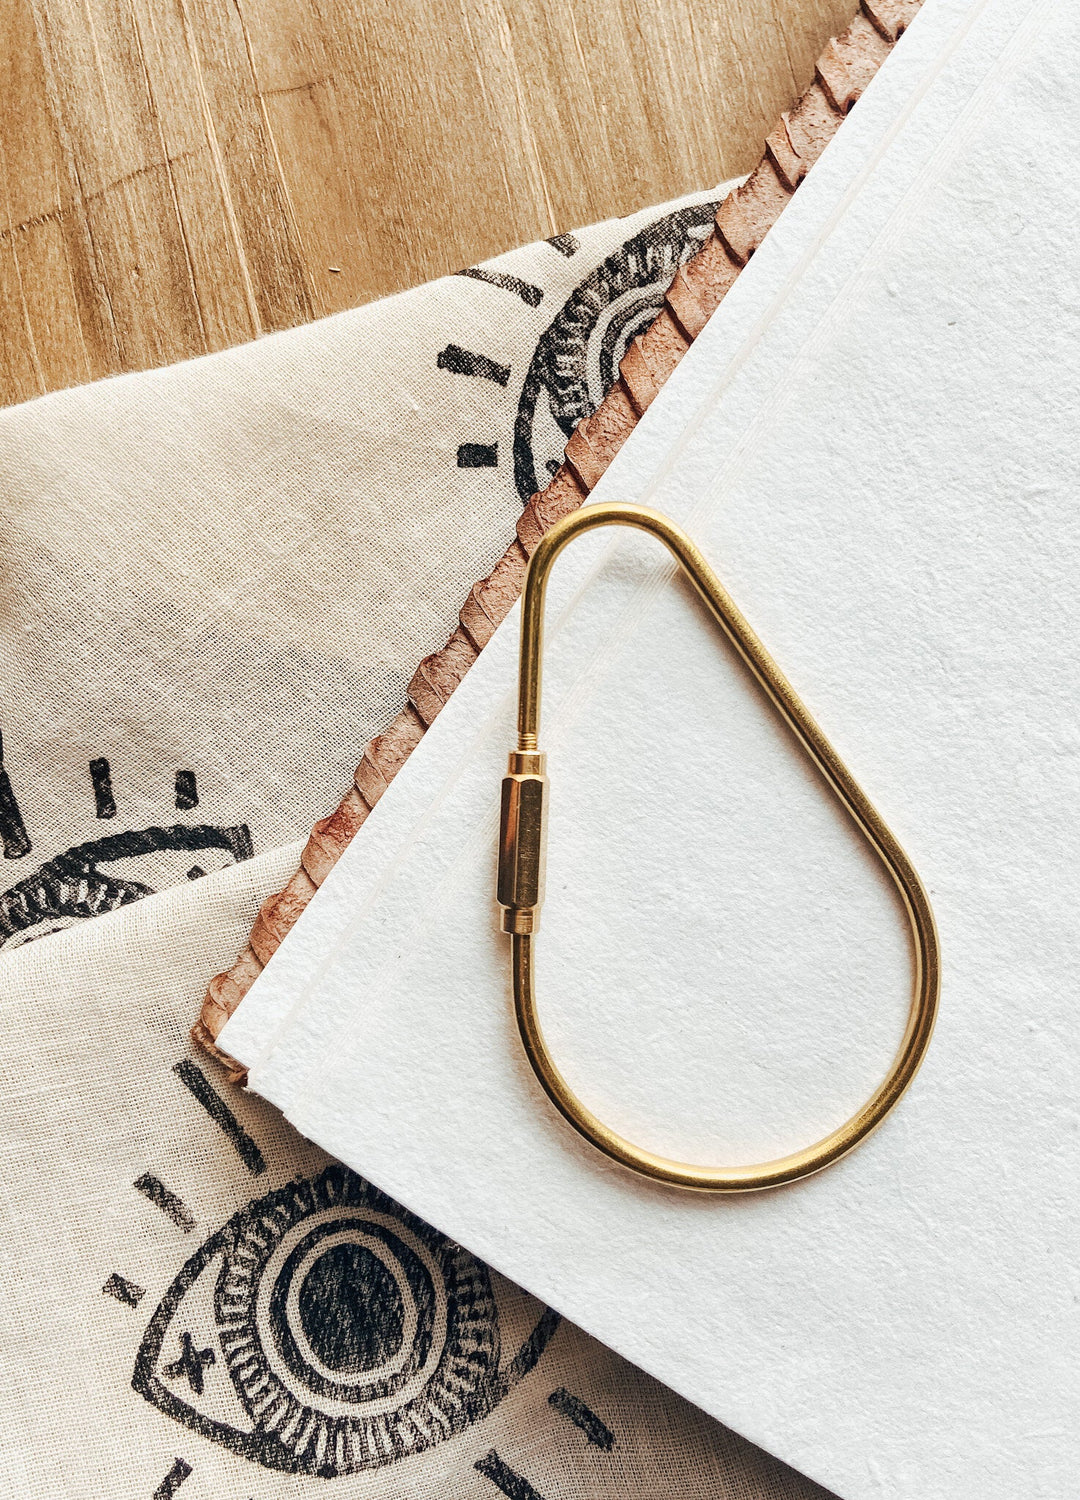 Fashionable brass carabiner from Leading Suppliers 